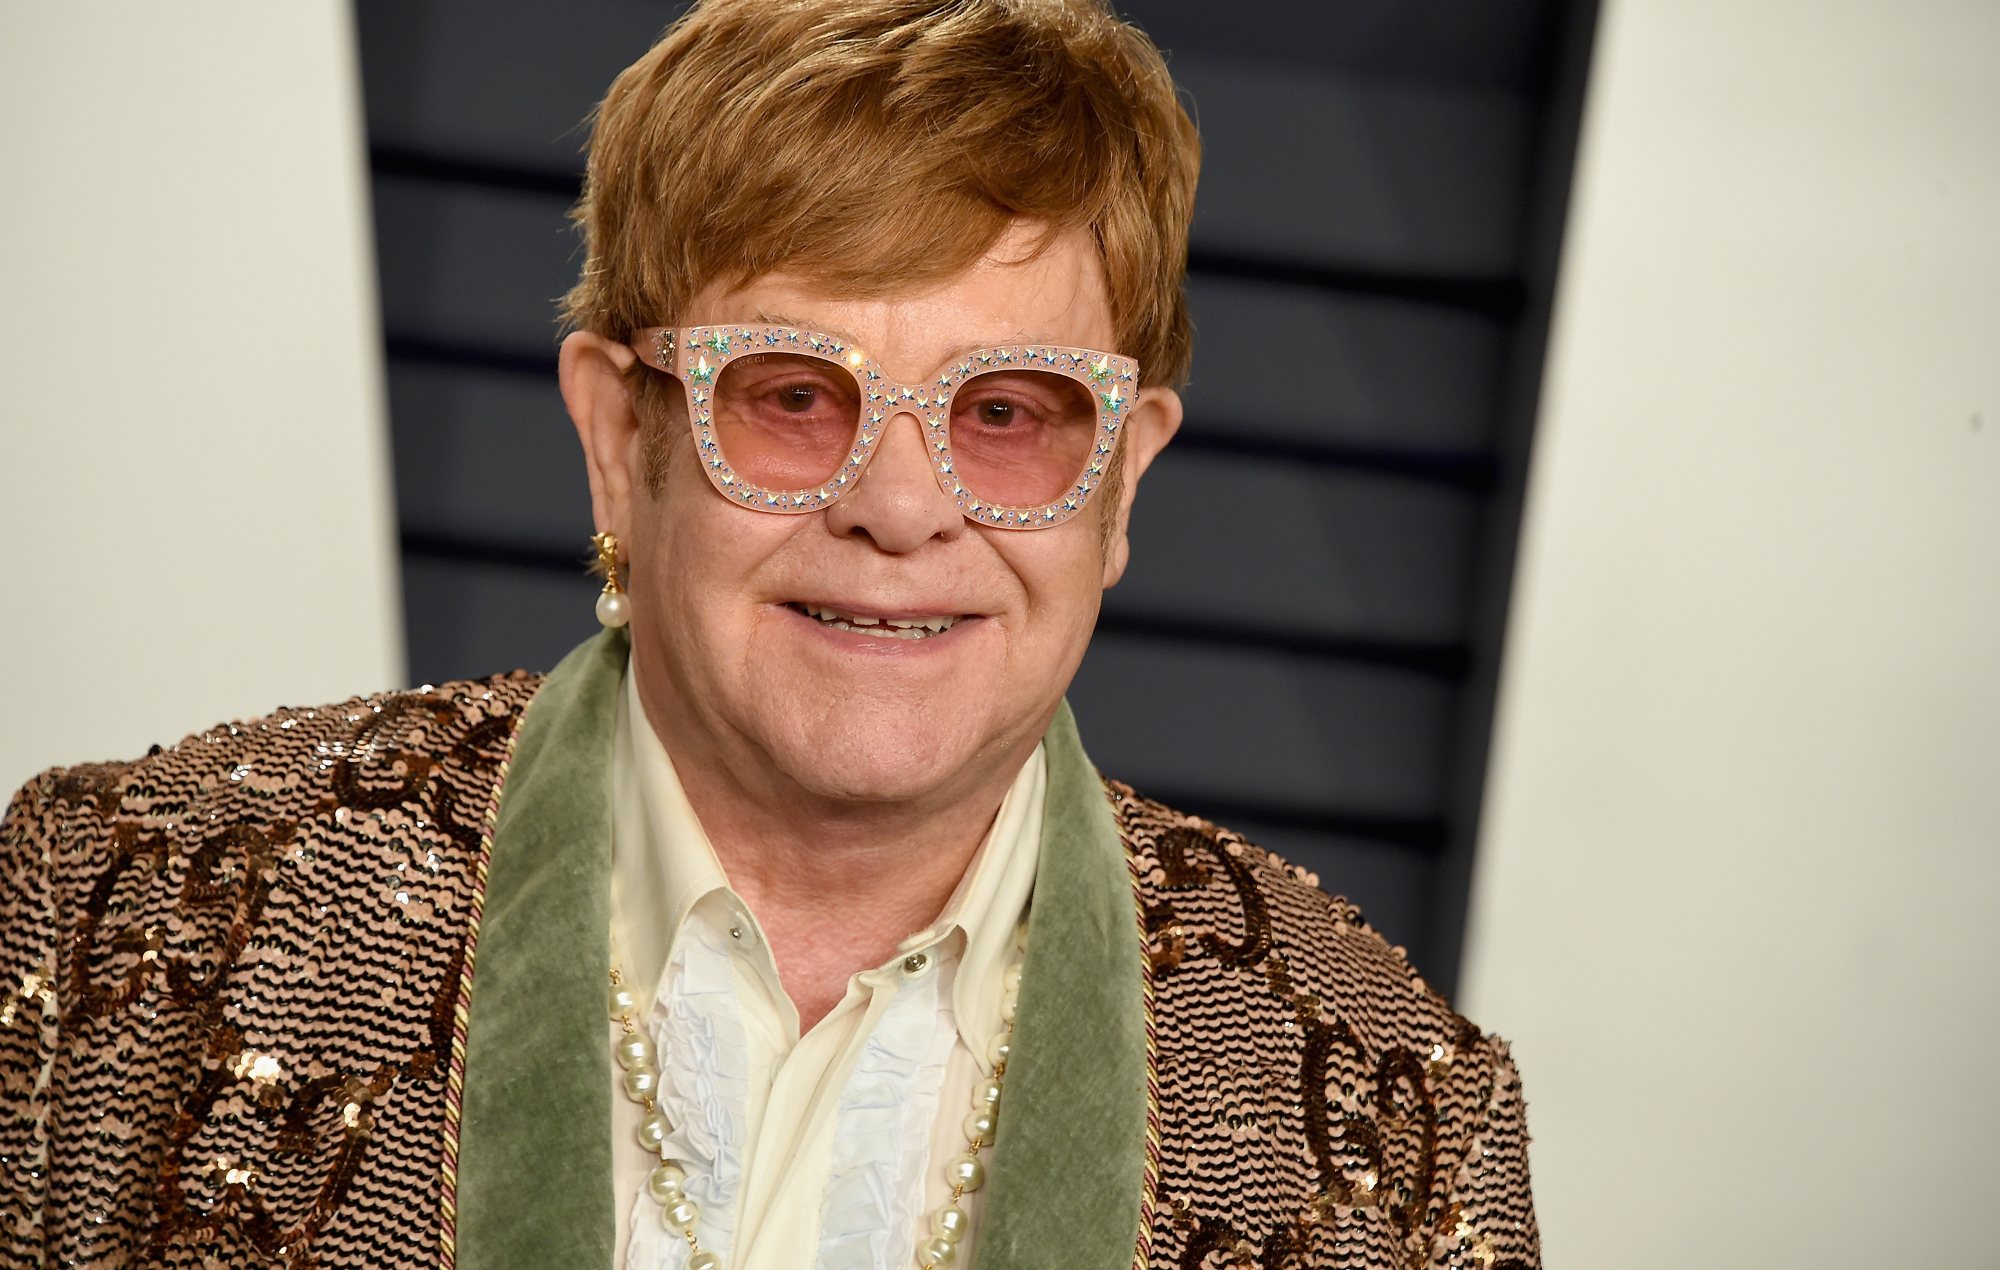 Elton John Says ‘I Literally Had To Learn To Walk Again’ After Prostate Cancer Surgery